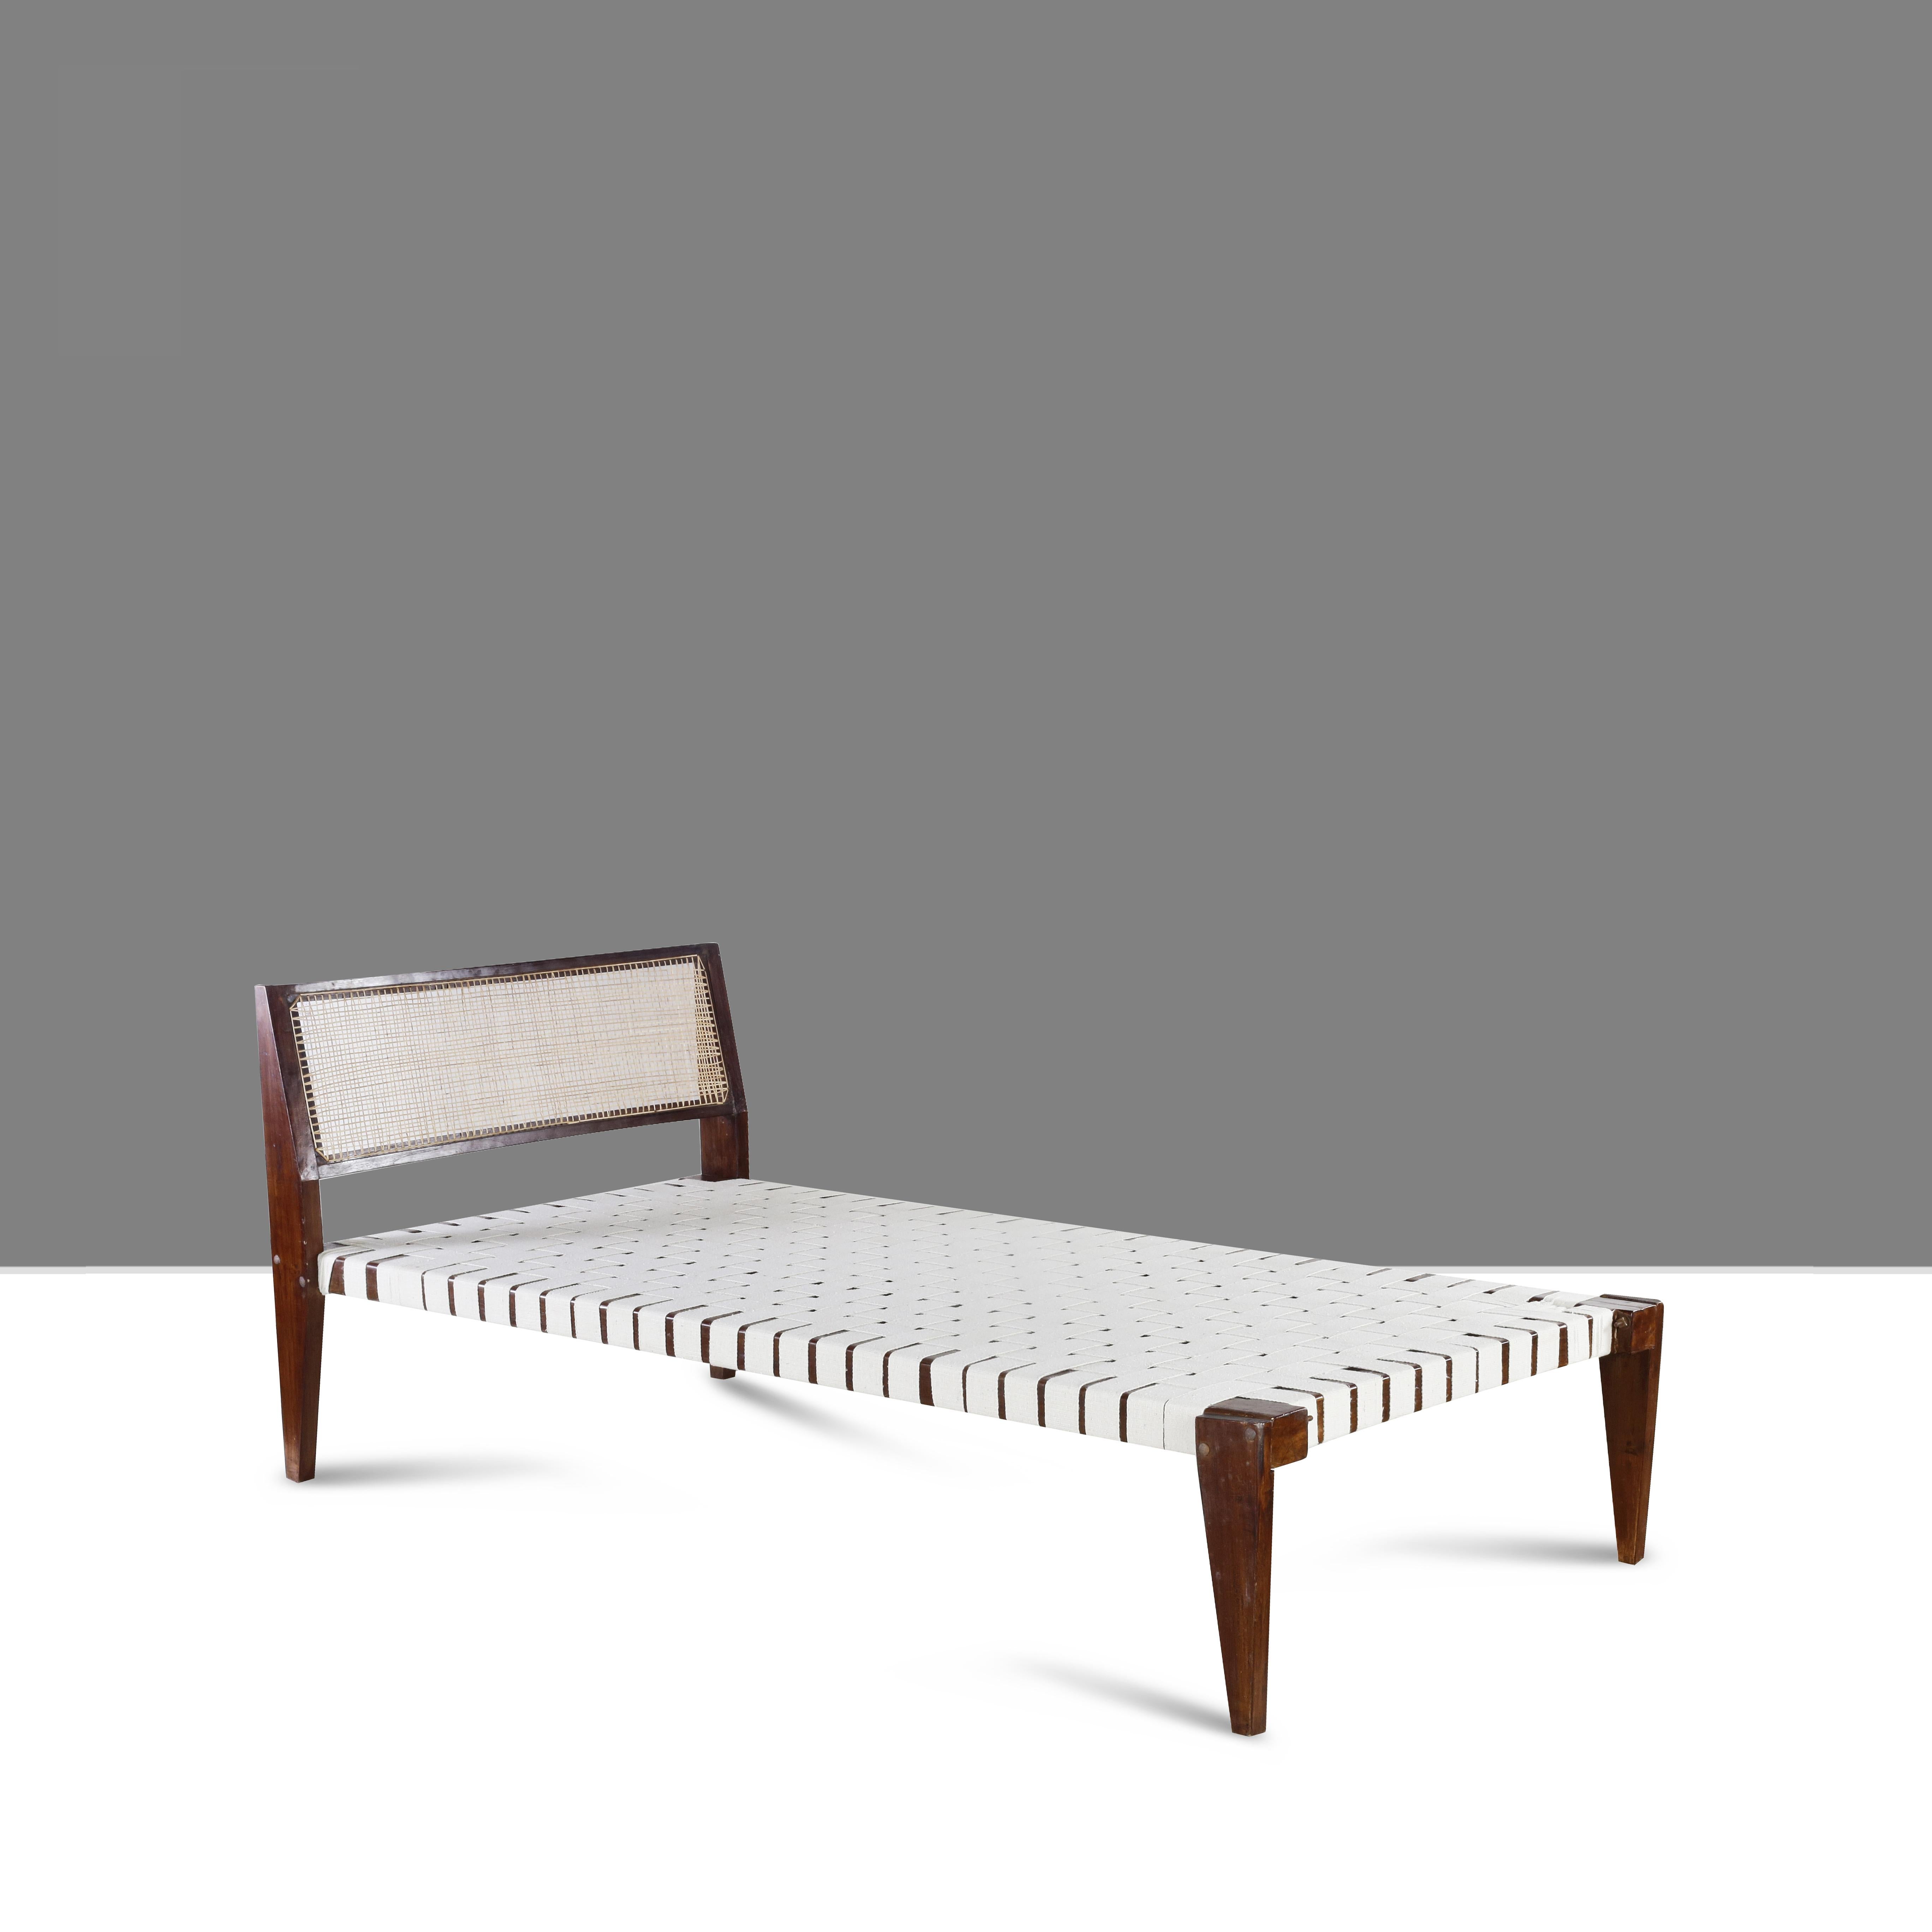 Pierre Jeanneret PJ-L-02-A Collapsible Single Bed / Authentic Mid-Century Modern For Sale 1